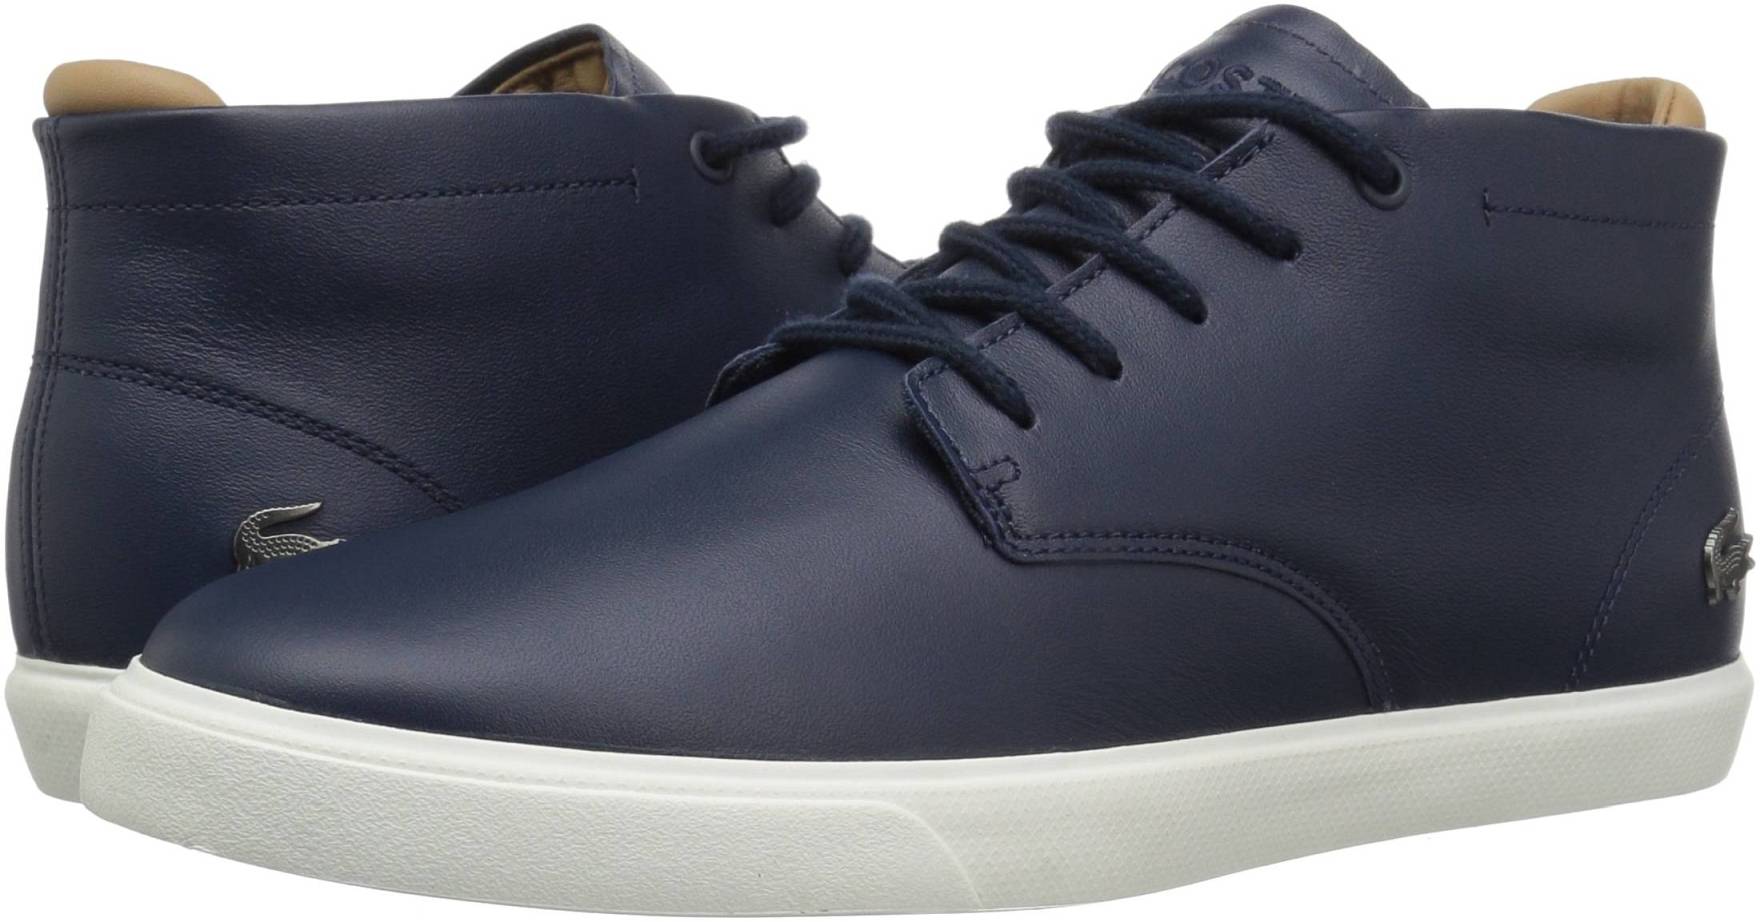 Lacoste Espere Chukka 317 1 Shoes Reviews Reasons To Buy